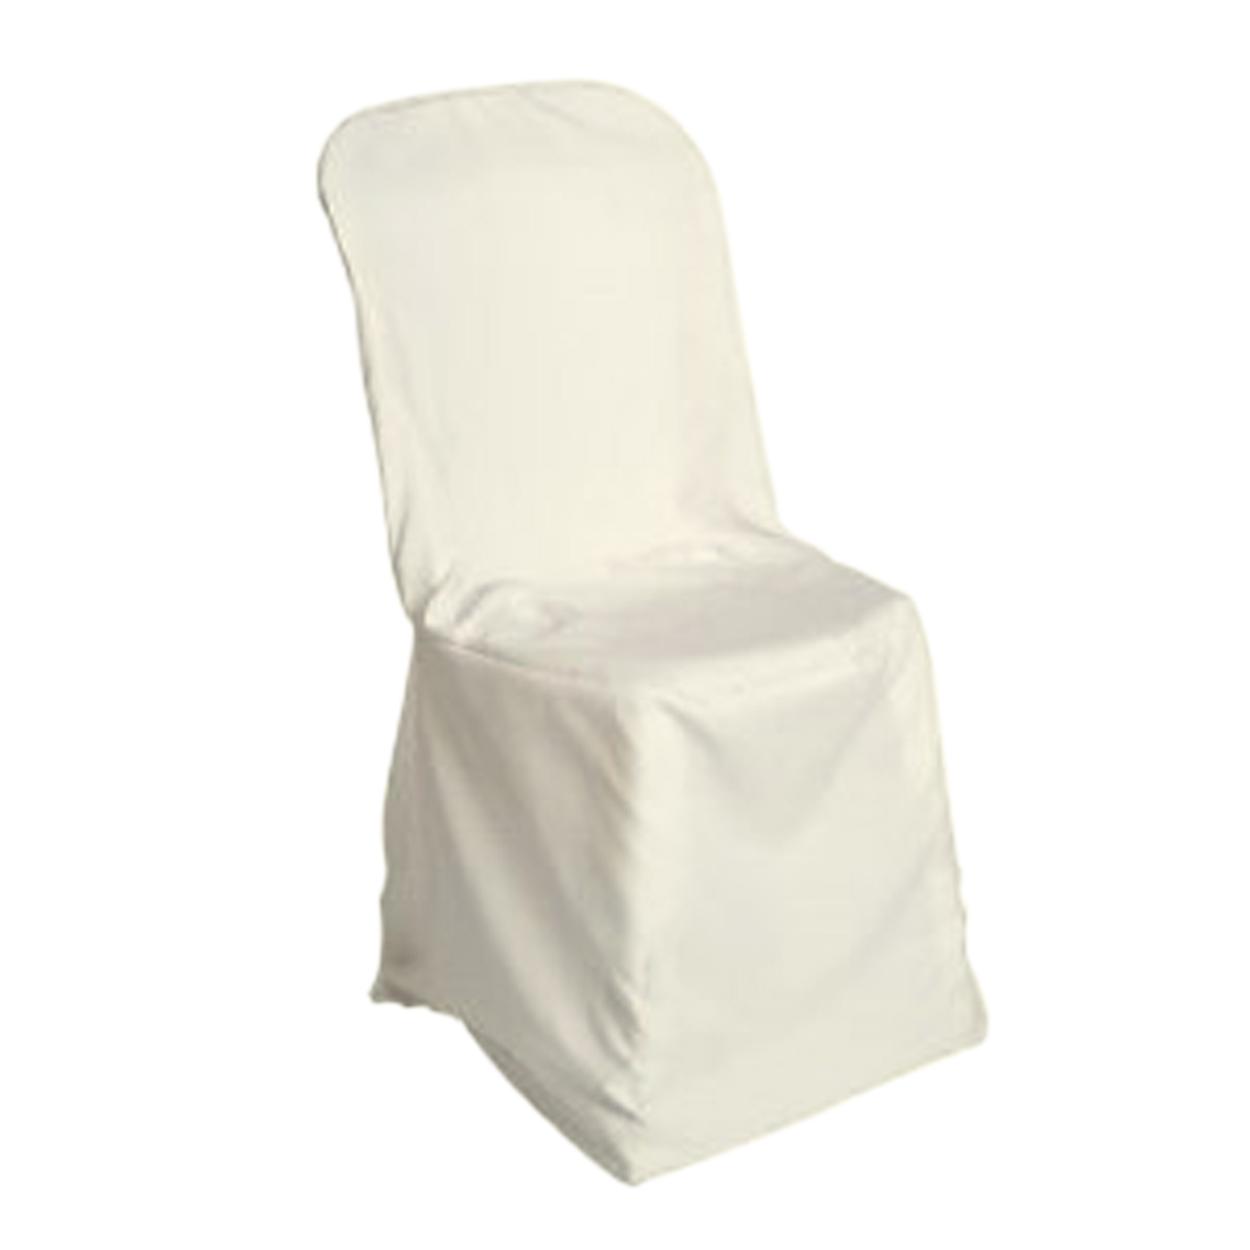 ivory chair cover weddings